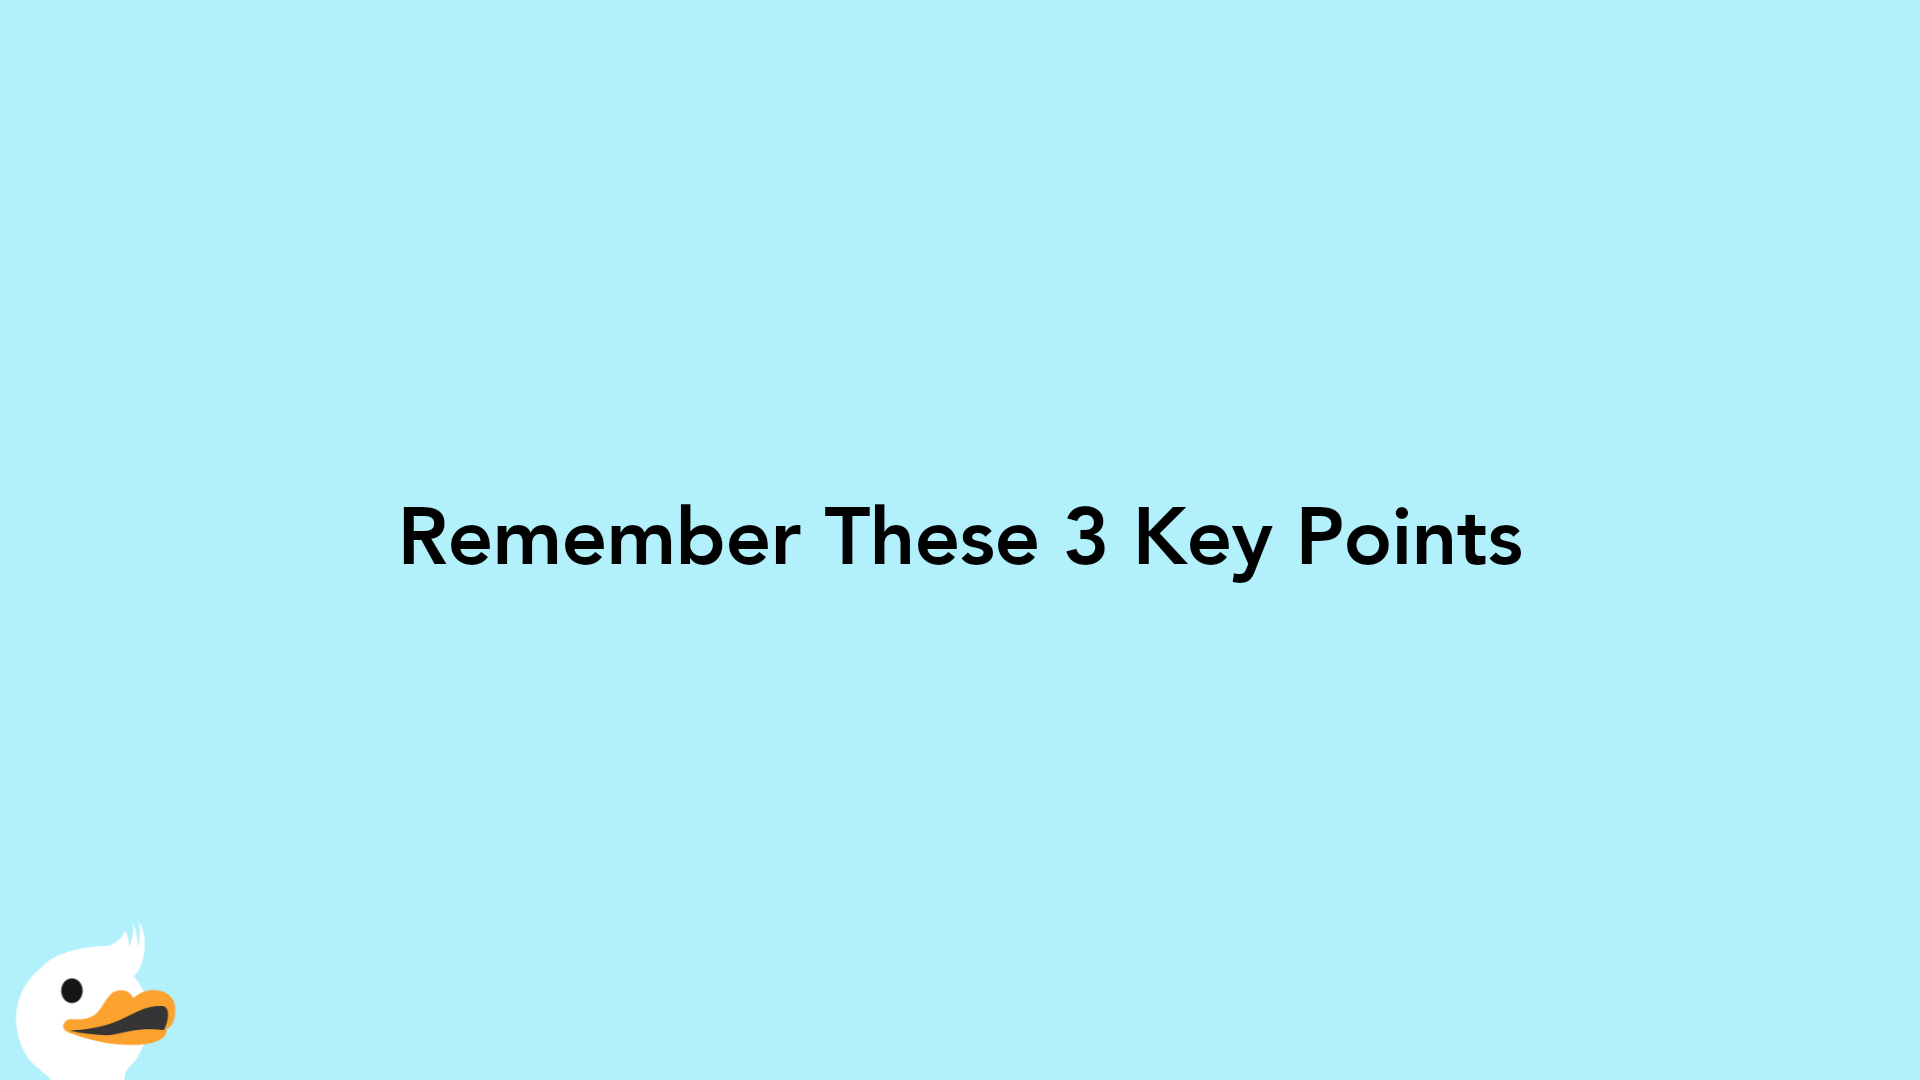 Remember These 3 Key Points